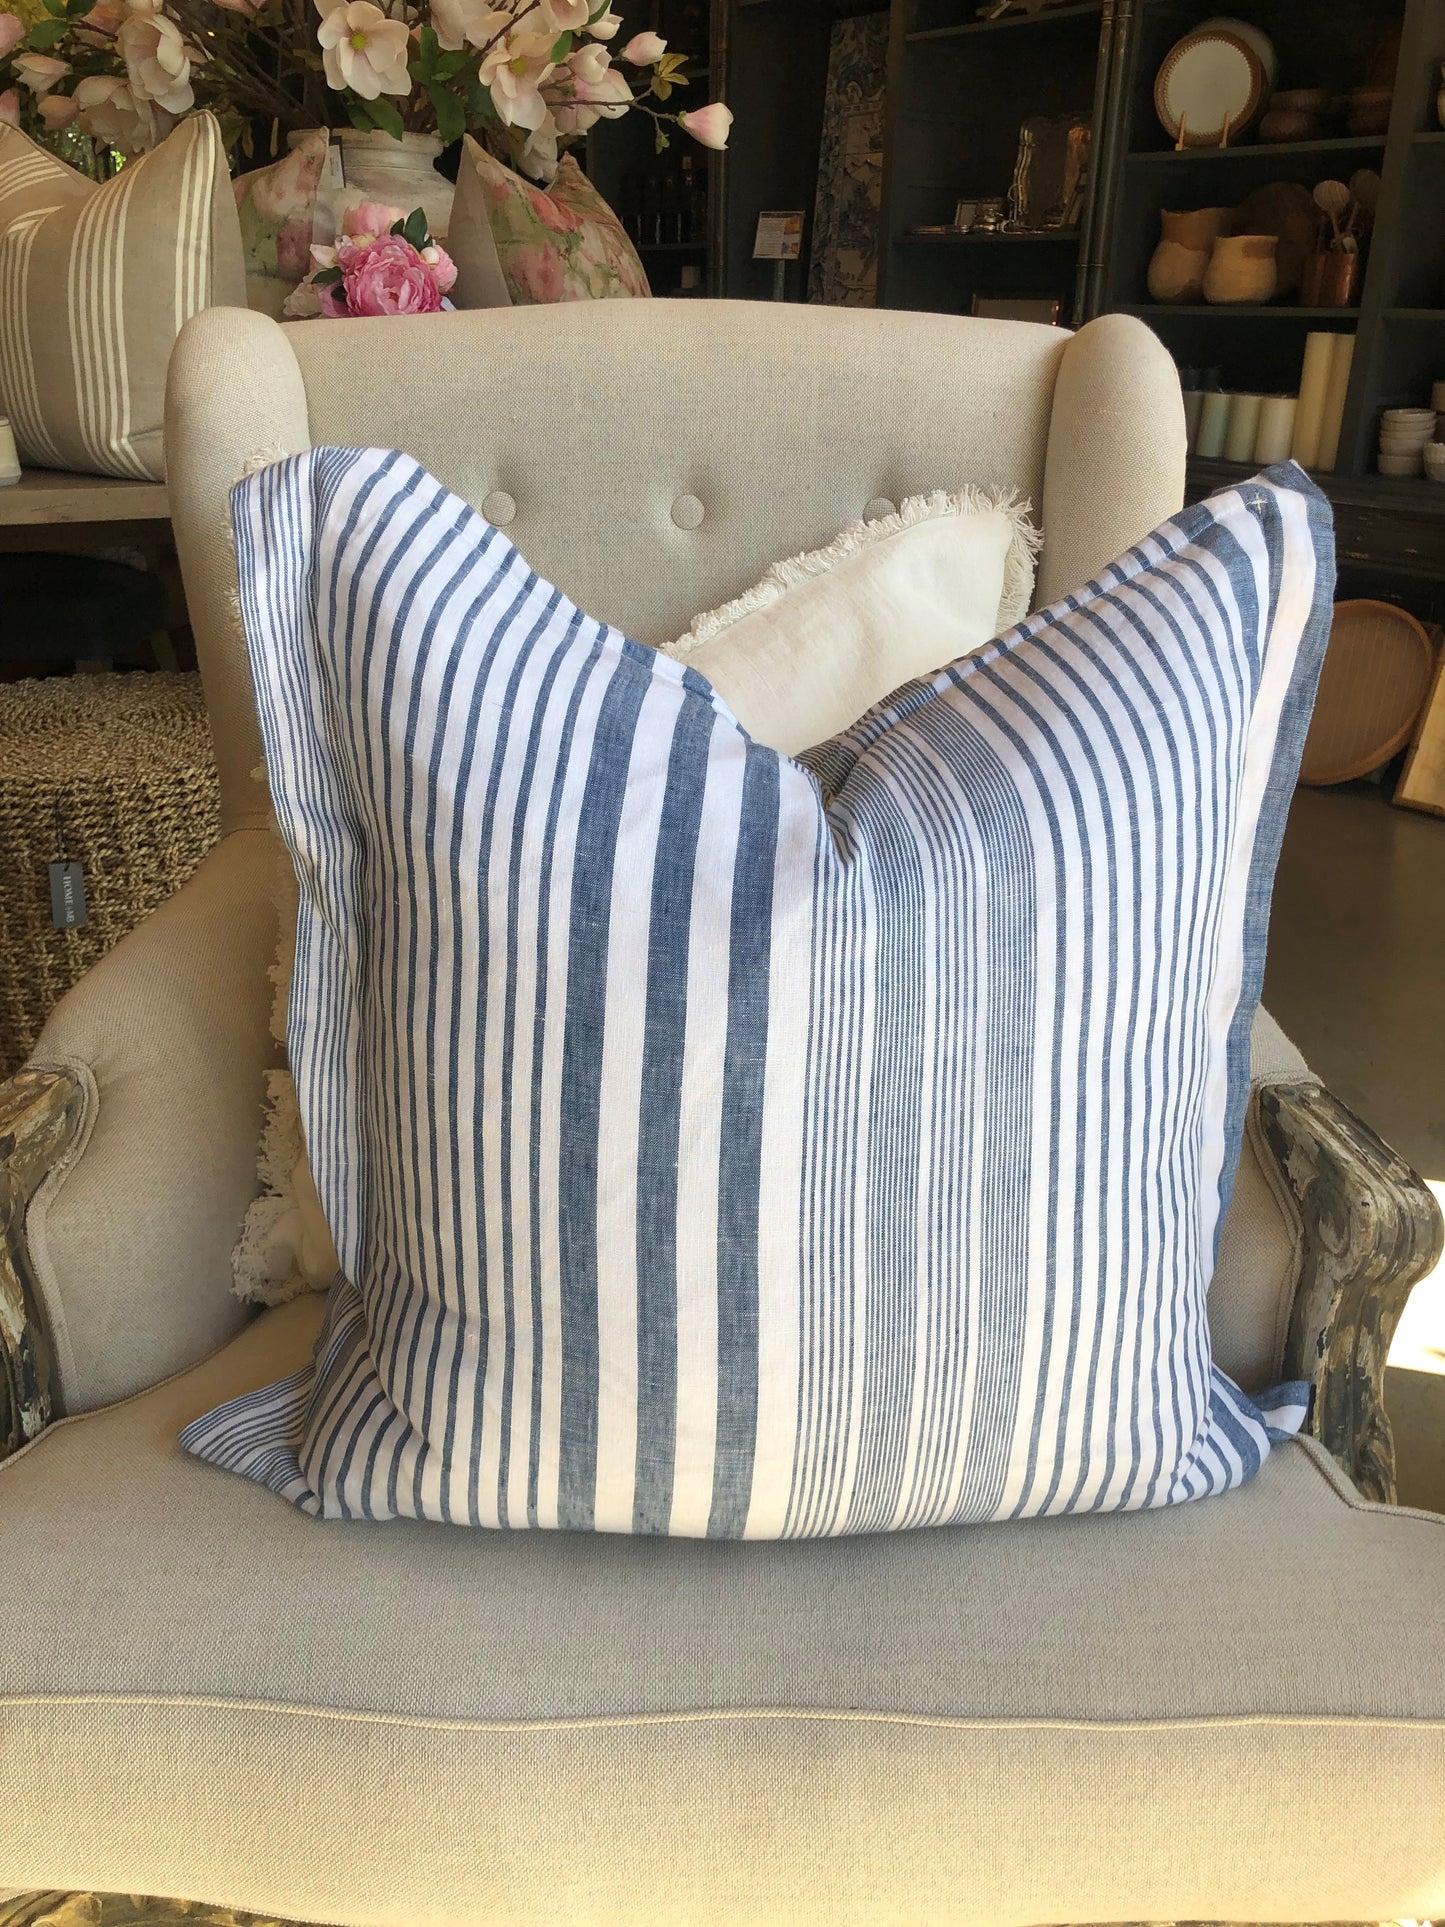 Experience the luxurious comfort and stylish design of the Joie De Vivre French Linen Blue White Stripe Cushion. Made with strong, hypo-allergenic yarn-dyed fabric, our cushions feature a vibrant color that won't fade. Each cushion is filled with a high-quality plush feather insert for maximum comfort. Elevate your home decor with our irresistible cushion.